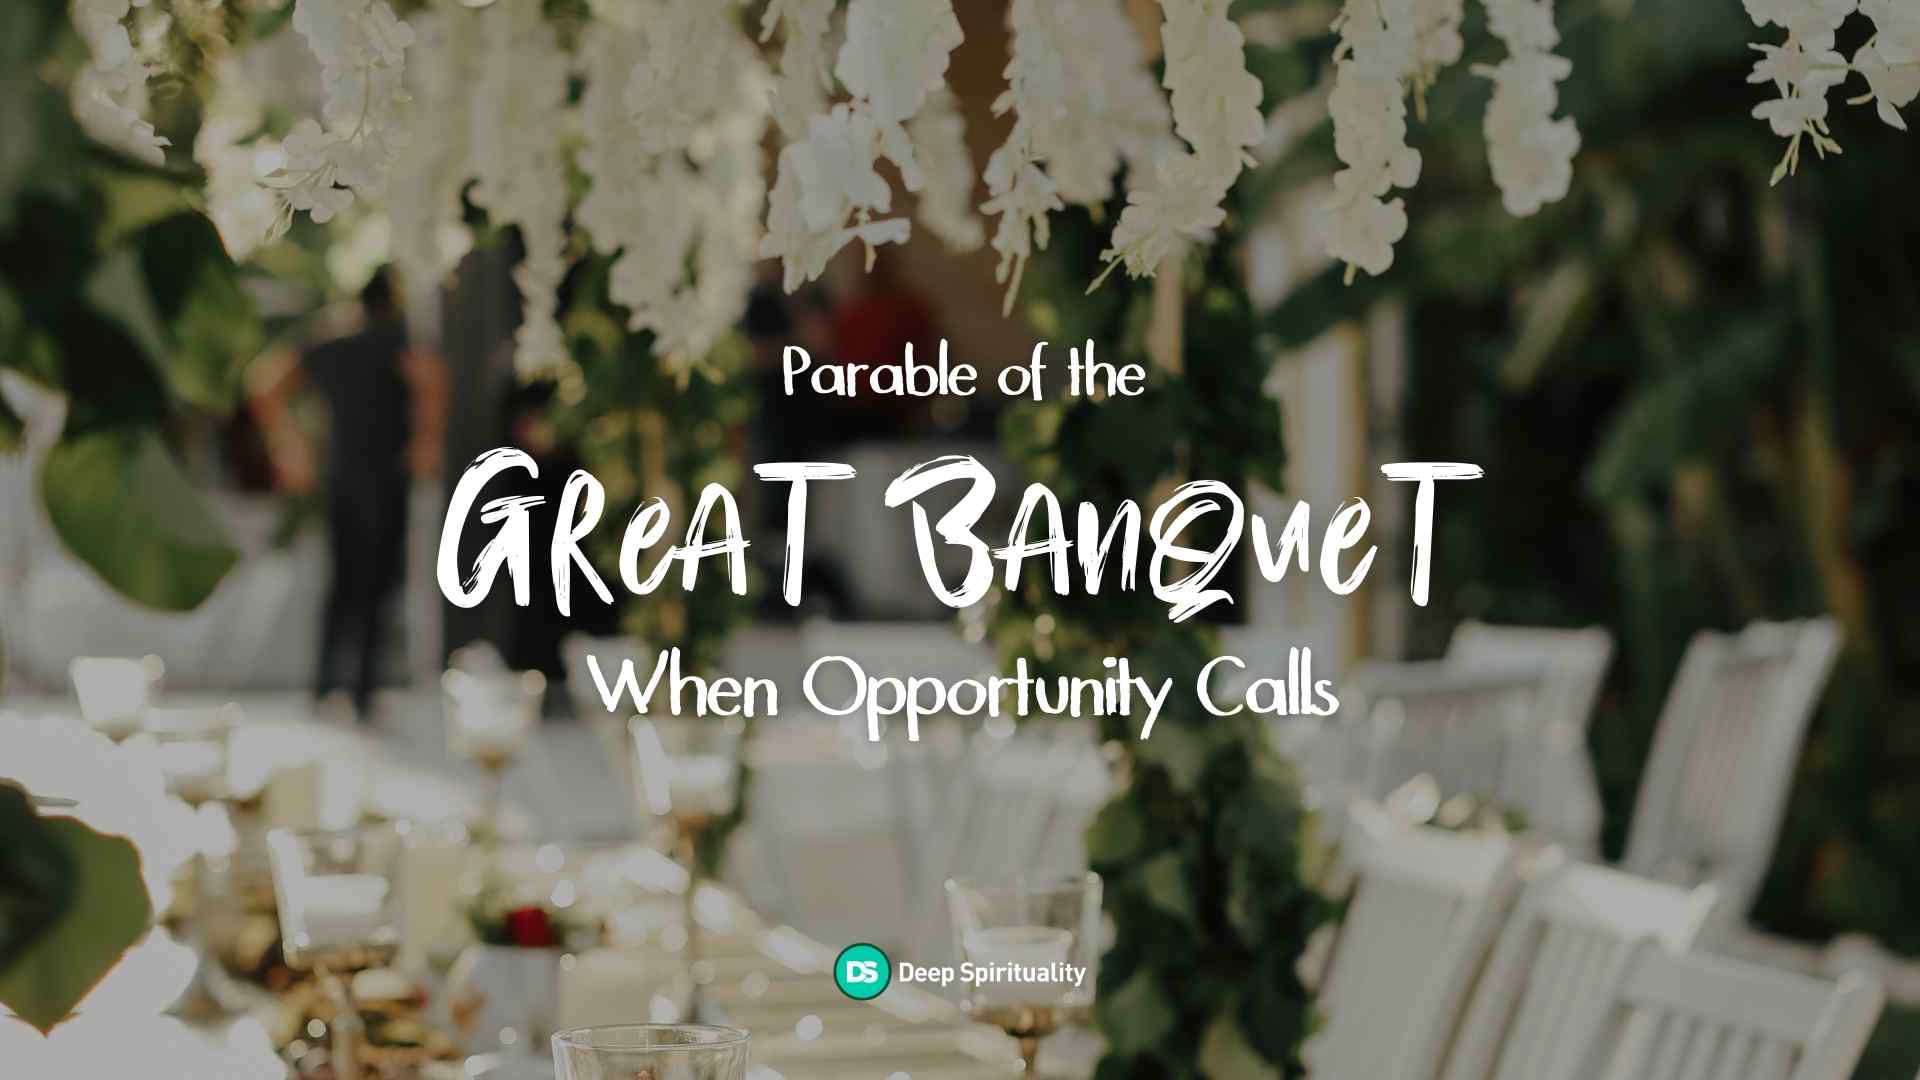 Parable of the Great Banquet: When Opportunity Calls 7